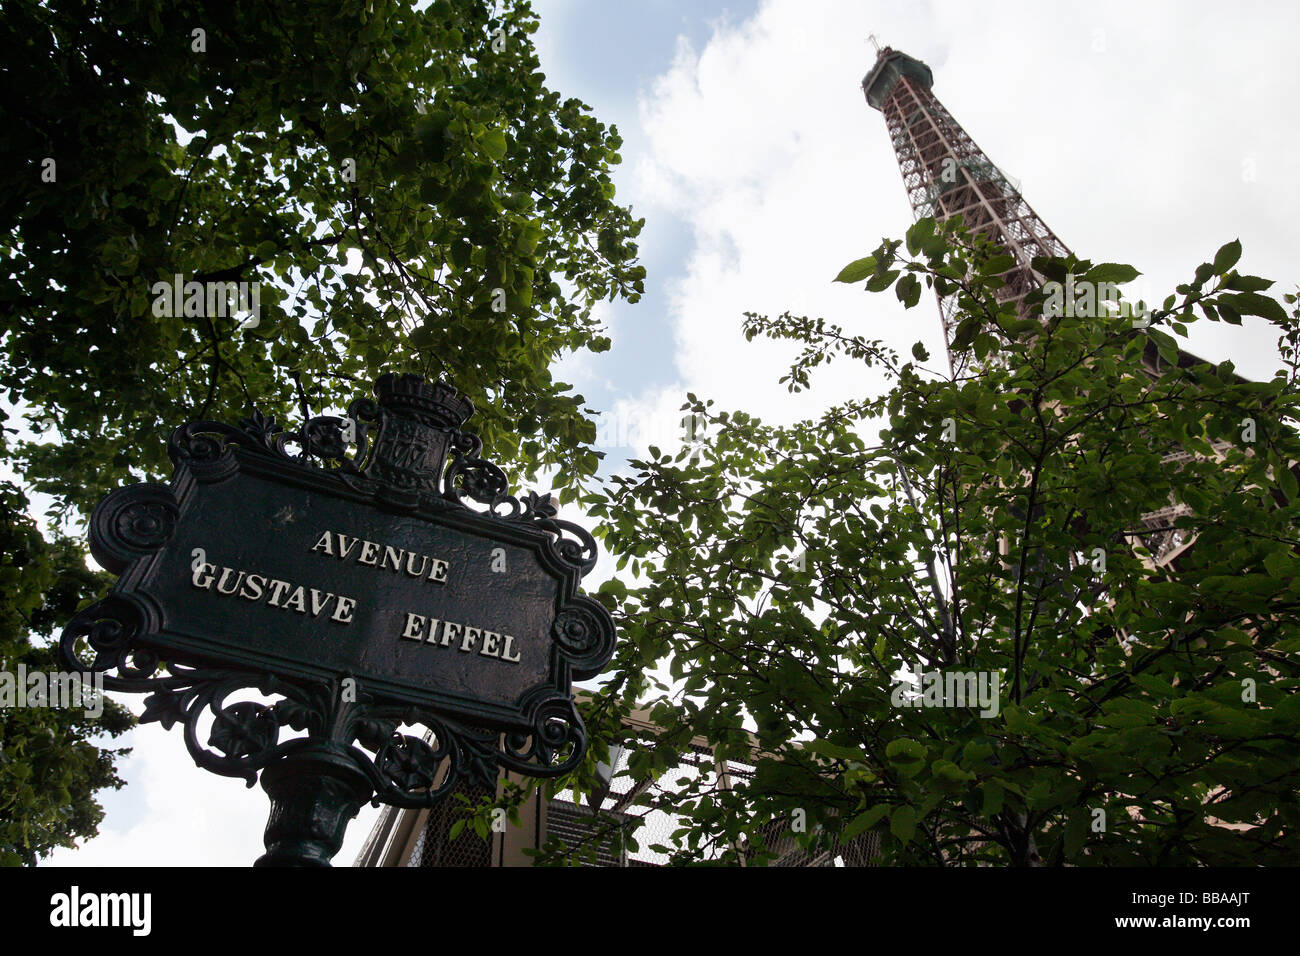 View of the Eiffel Tower from Avenue Gustave Eiffel Stock Photo